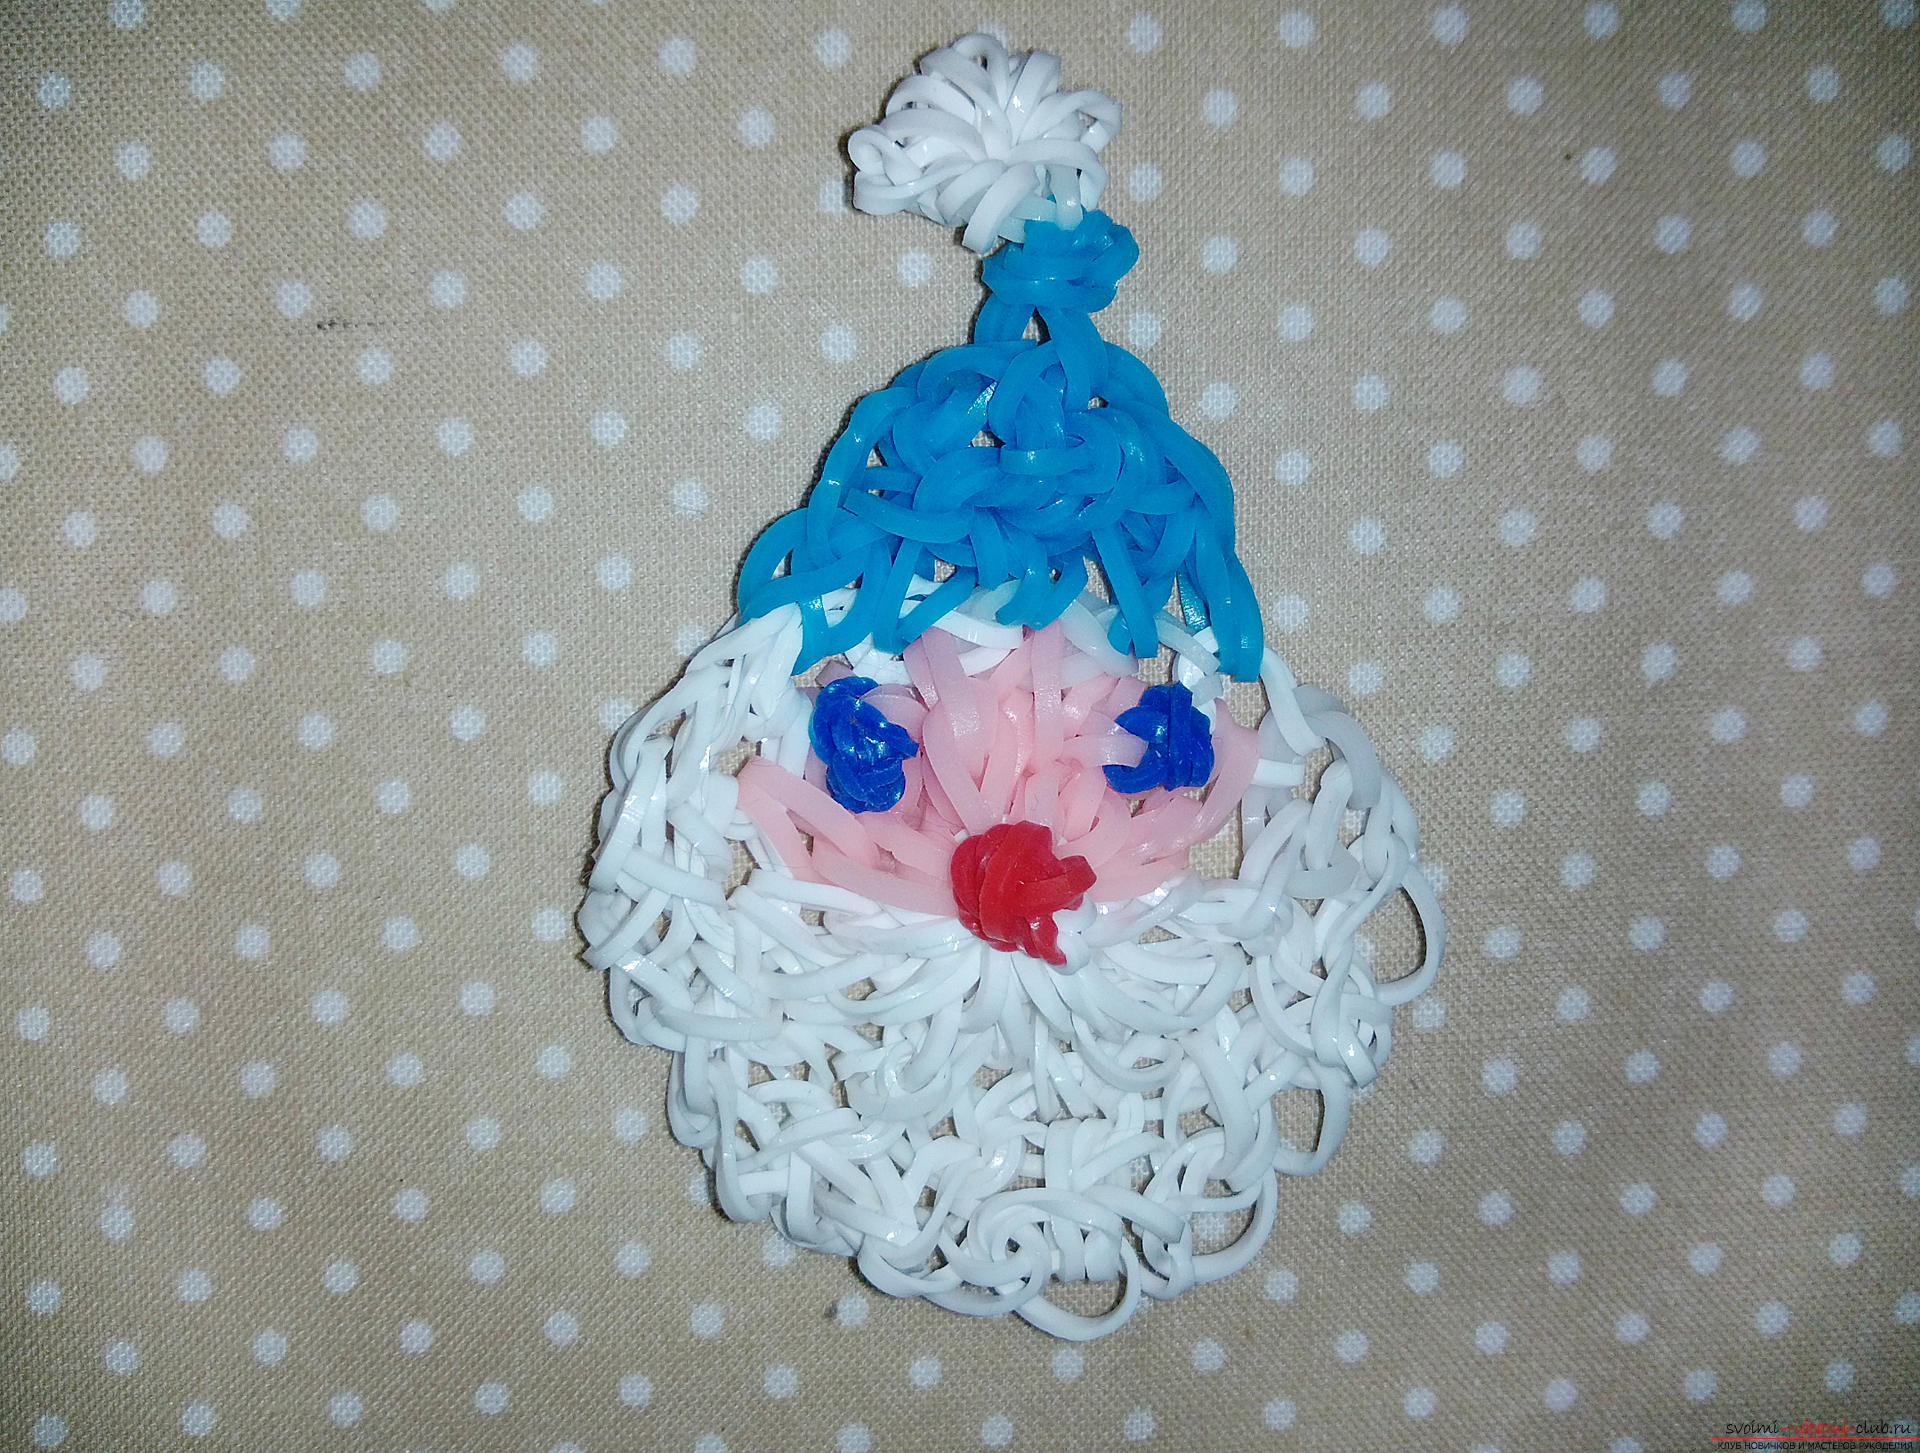 The master class will teach you how to weave a New Year's craft - Santa Claus from rubber bands crocheted. Photo Number 11